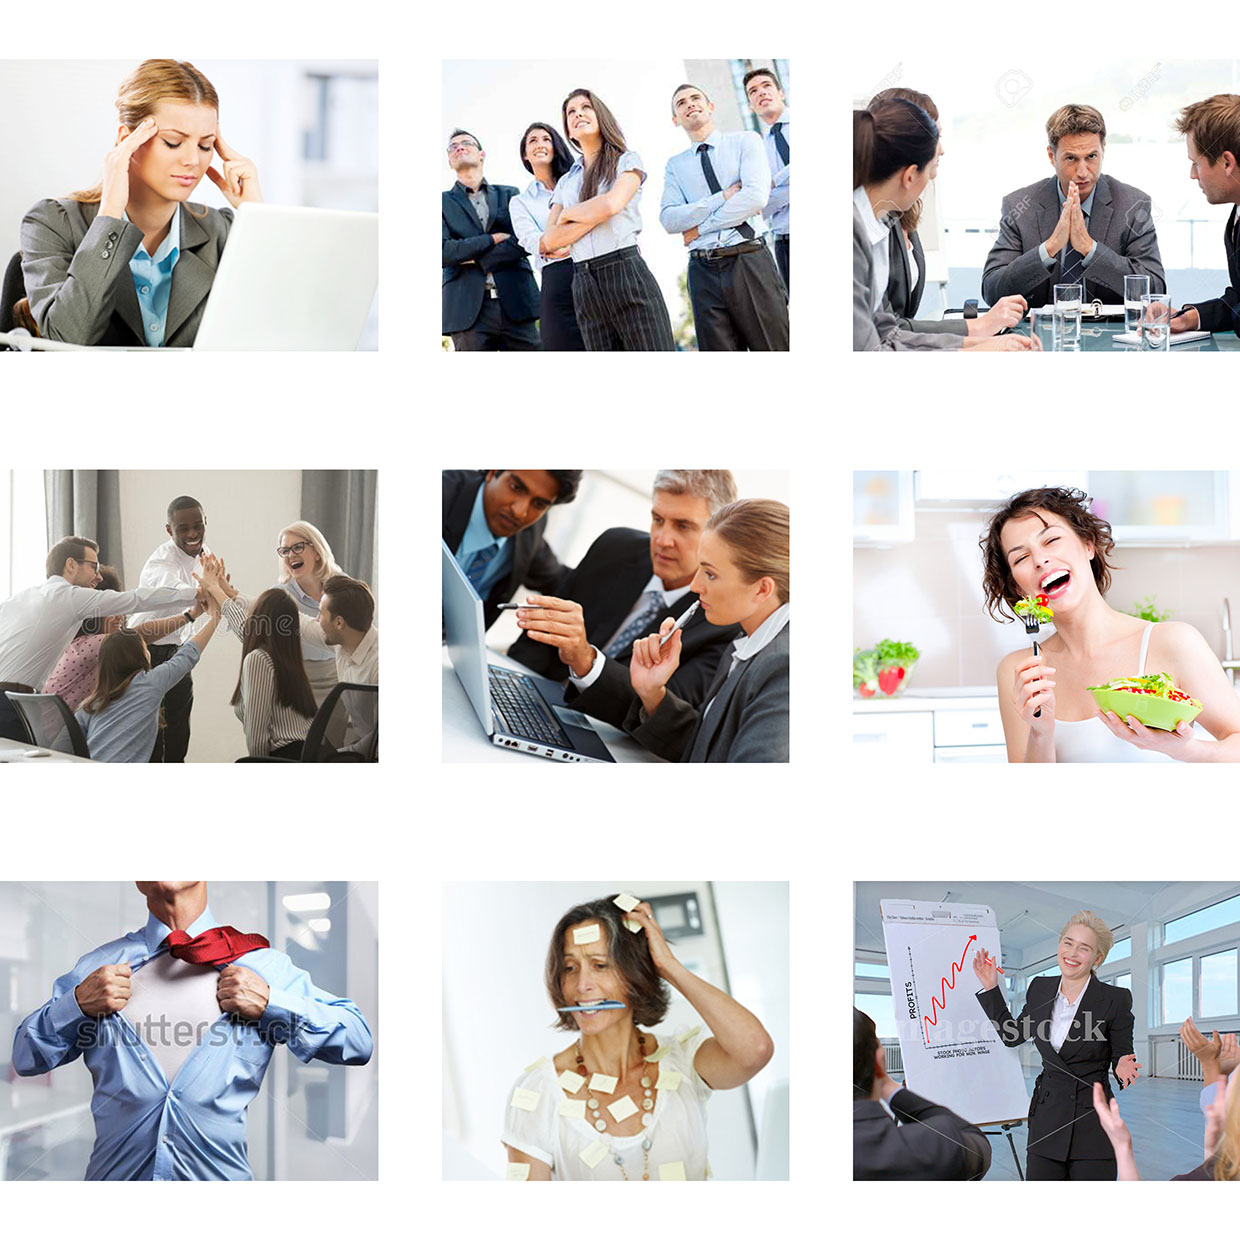 A range of really bad 90s stock images used as a way to help people check in with one another and have fun doing it